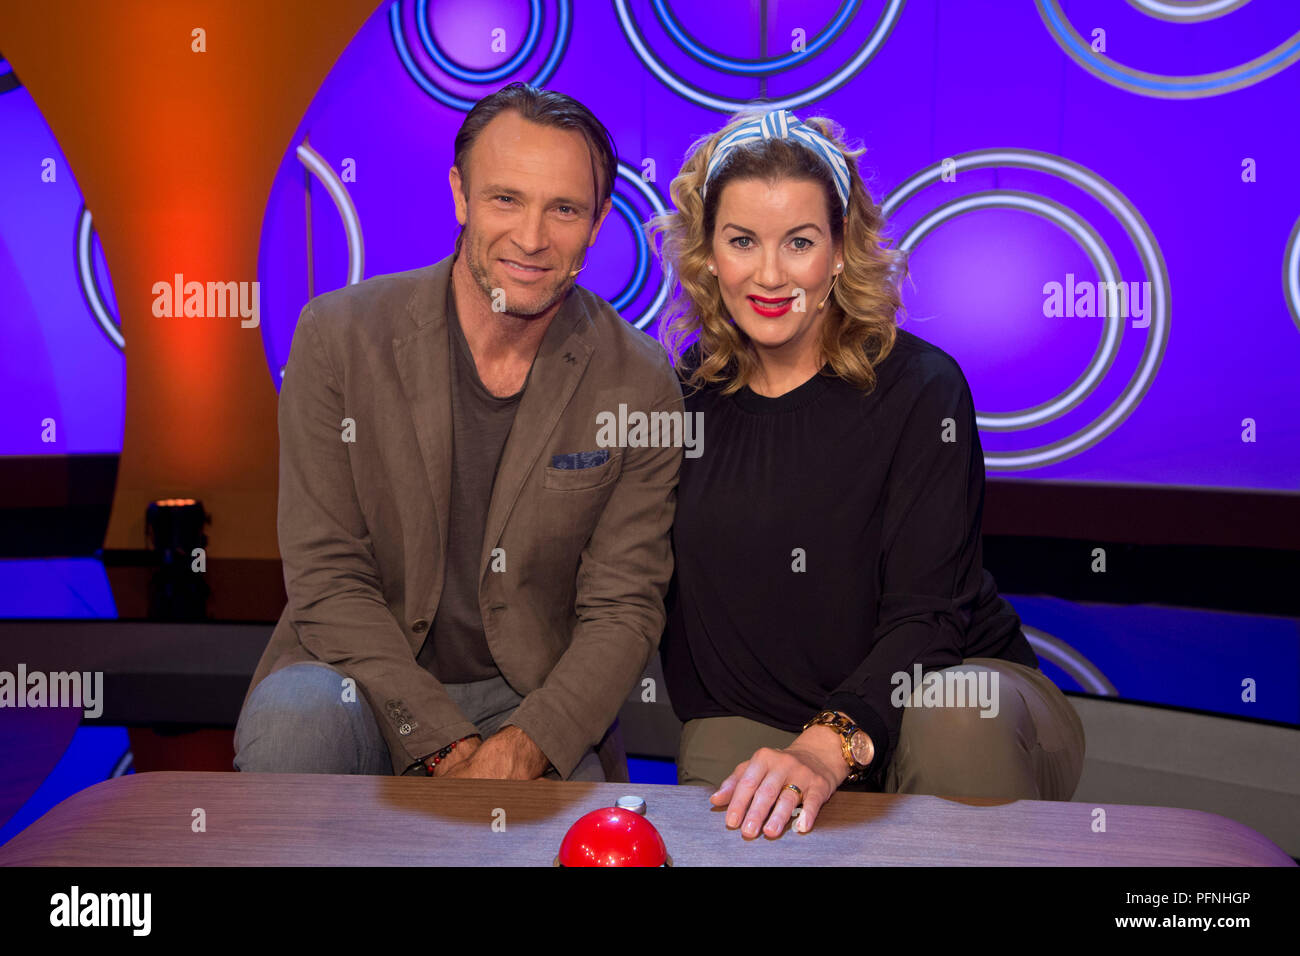 From left: Bernhard BETTERMANN, Germany, actor, and Alexa Maria SURHOLT, Germany, actress, guest on the show 'Dingsda', television program, recorded on 27.06.2018 in Koeln, | usage worldwide Stock Photo